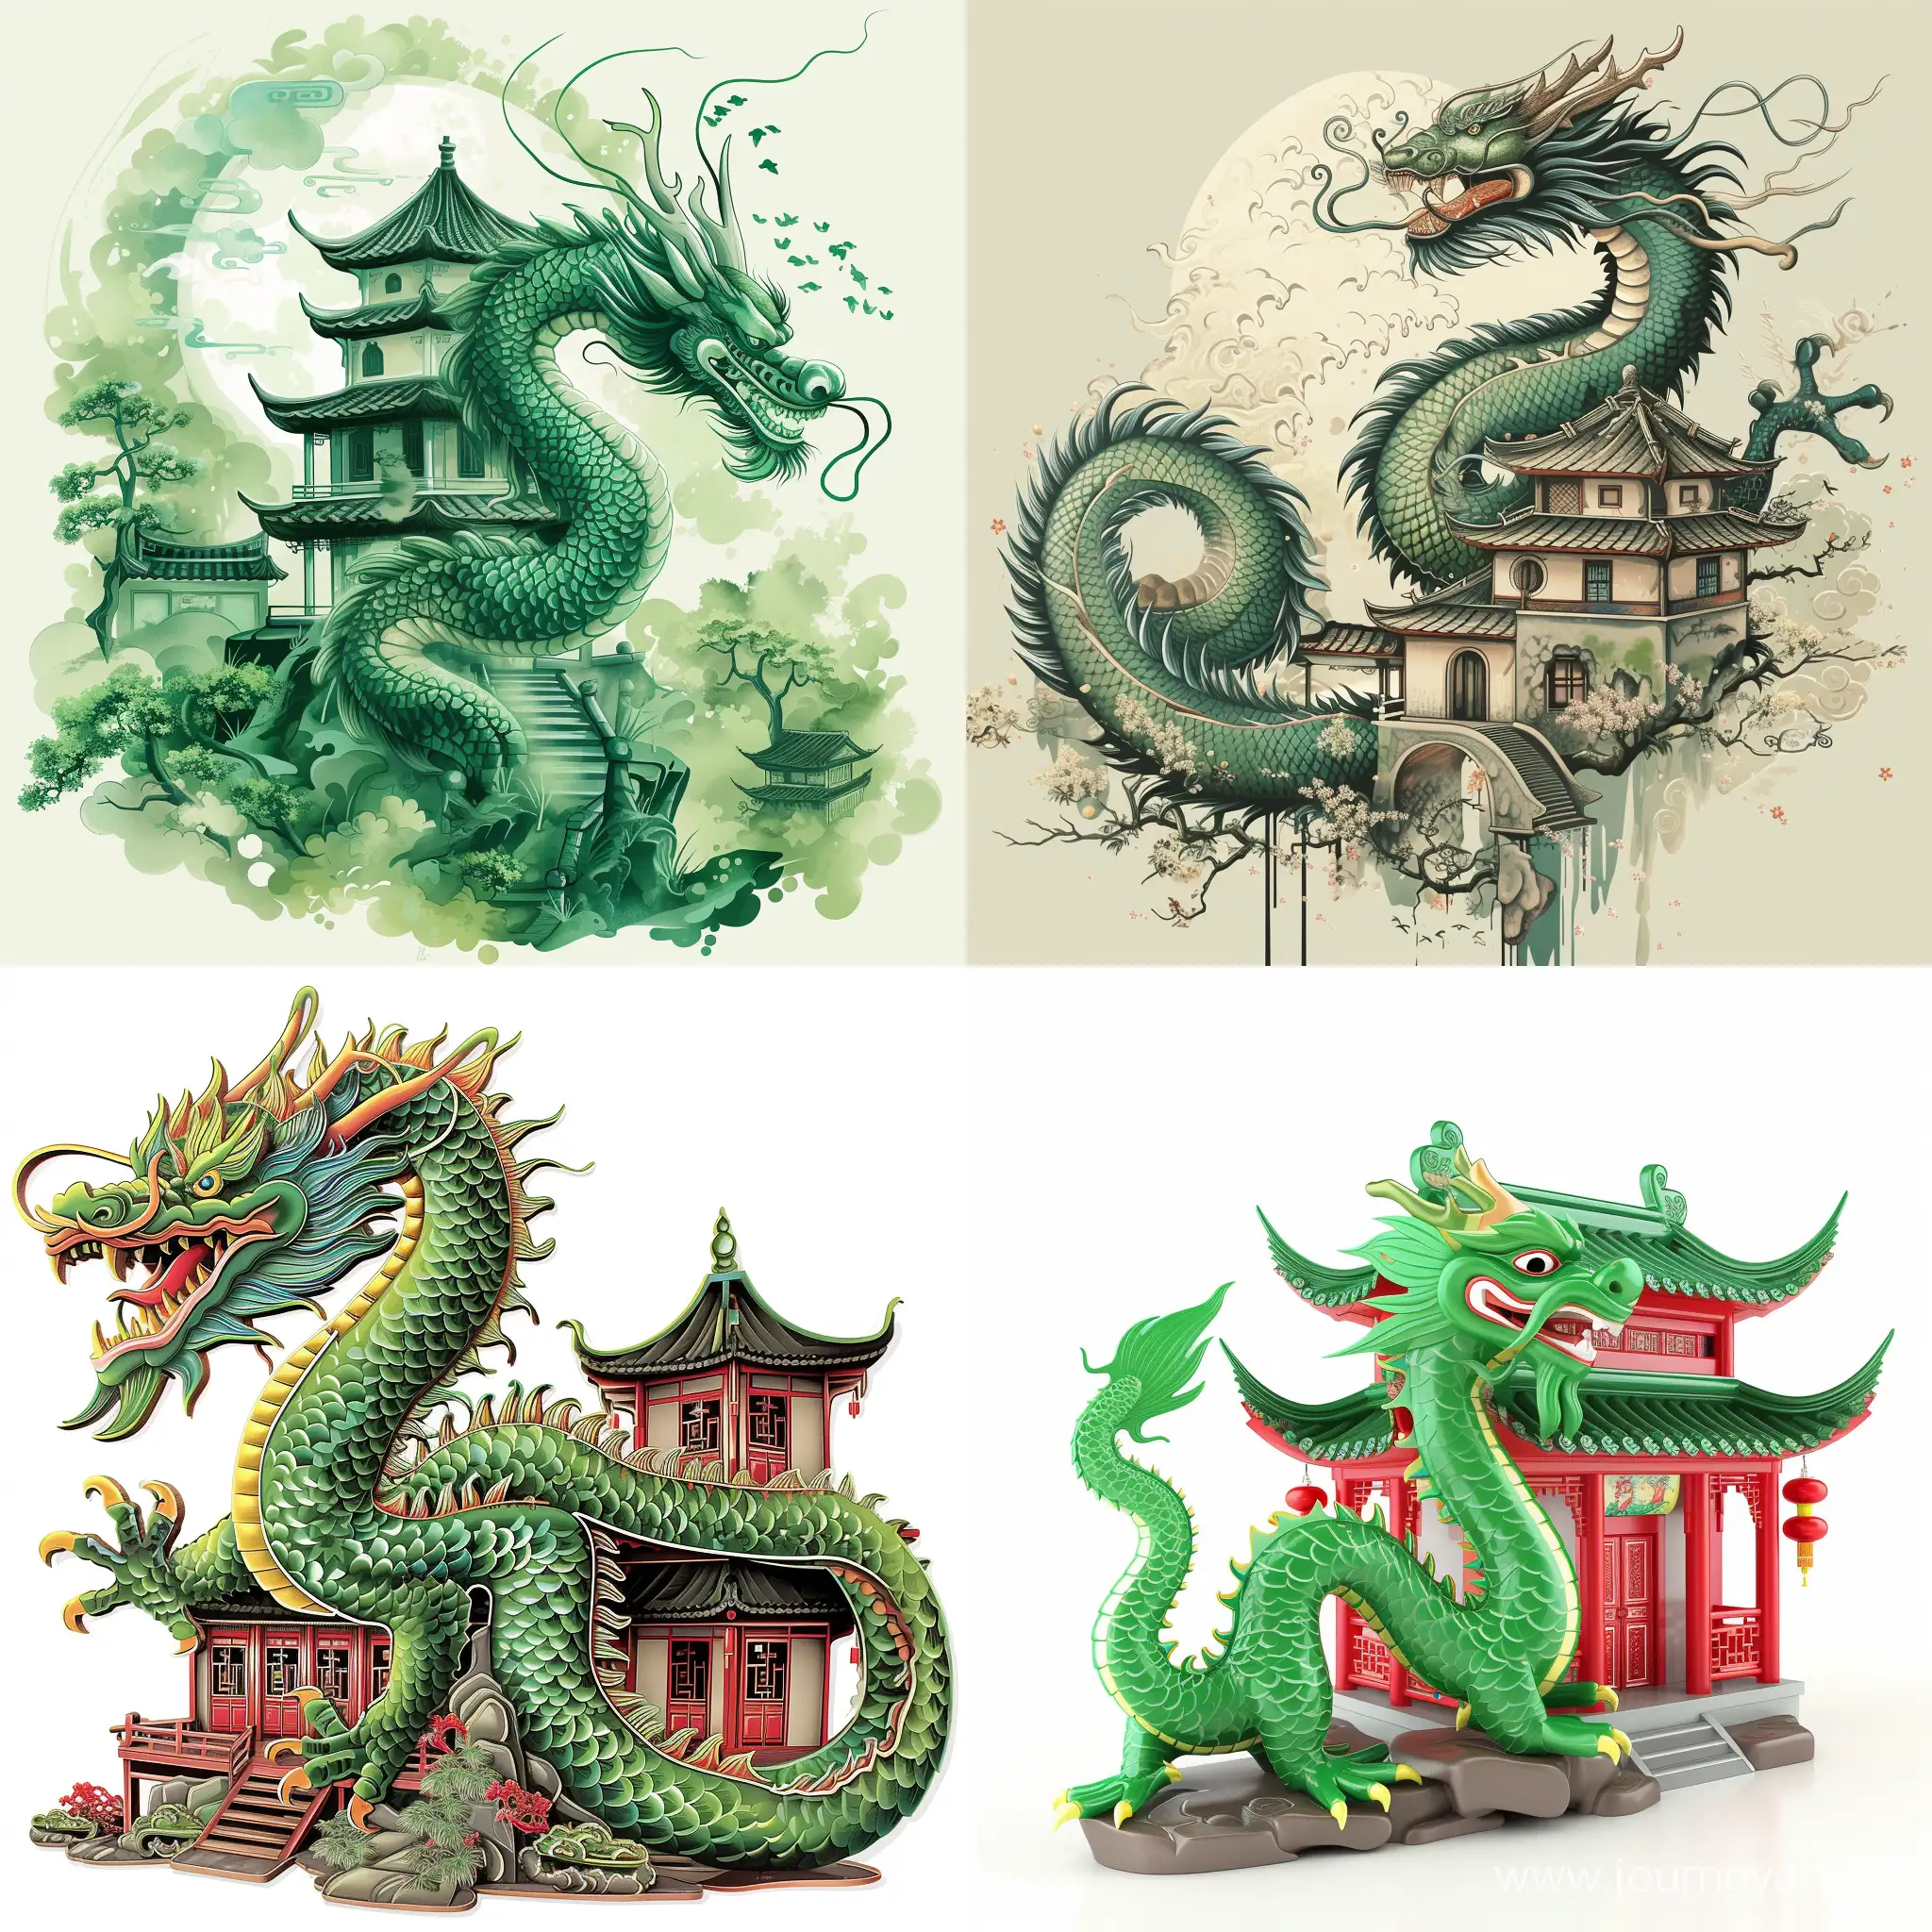 Chinese-Green-Dragon-with-Traditional-House-in-Square-Aspect-Ratio